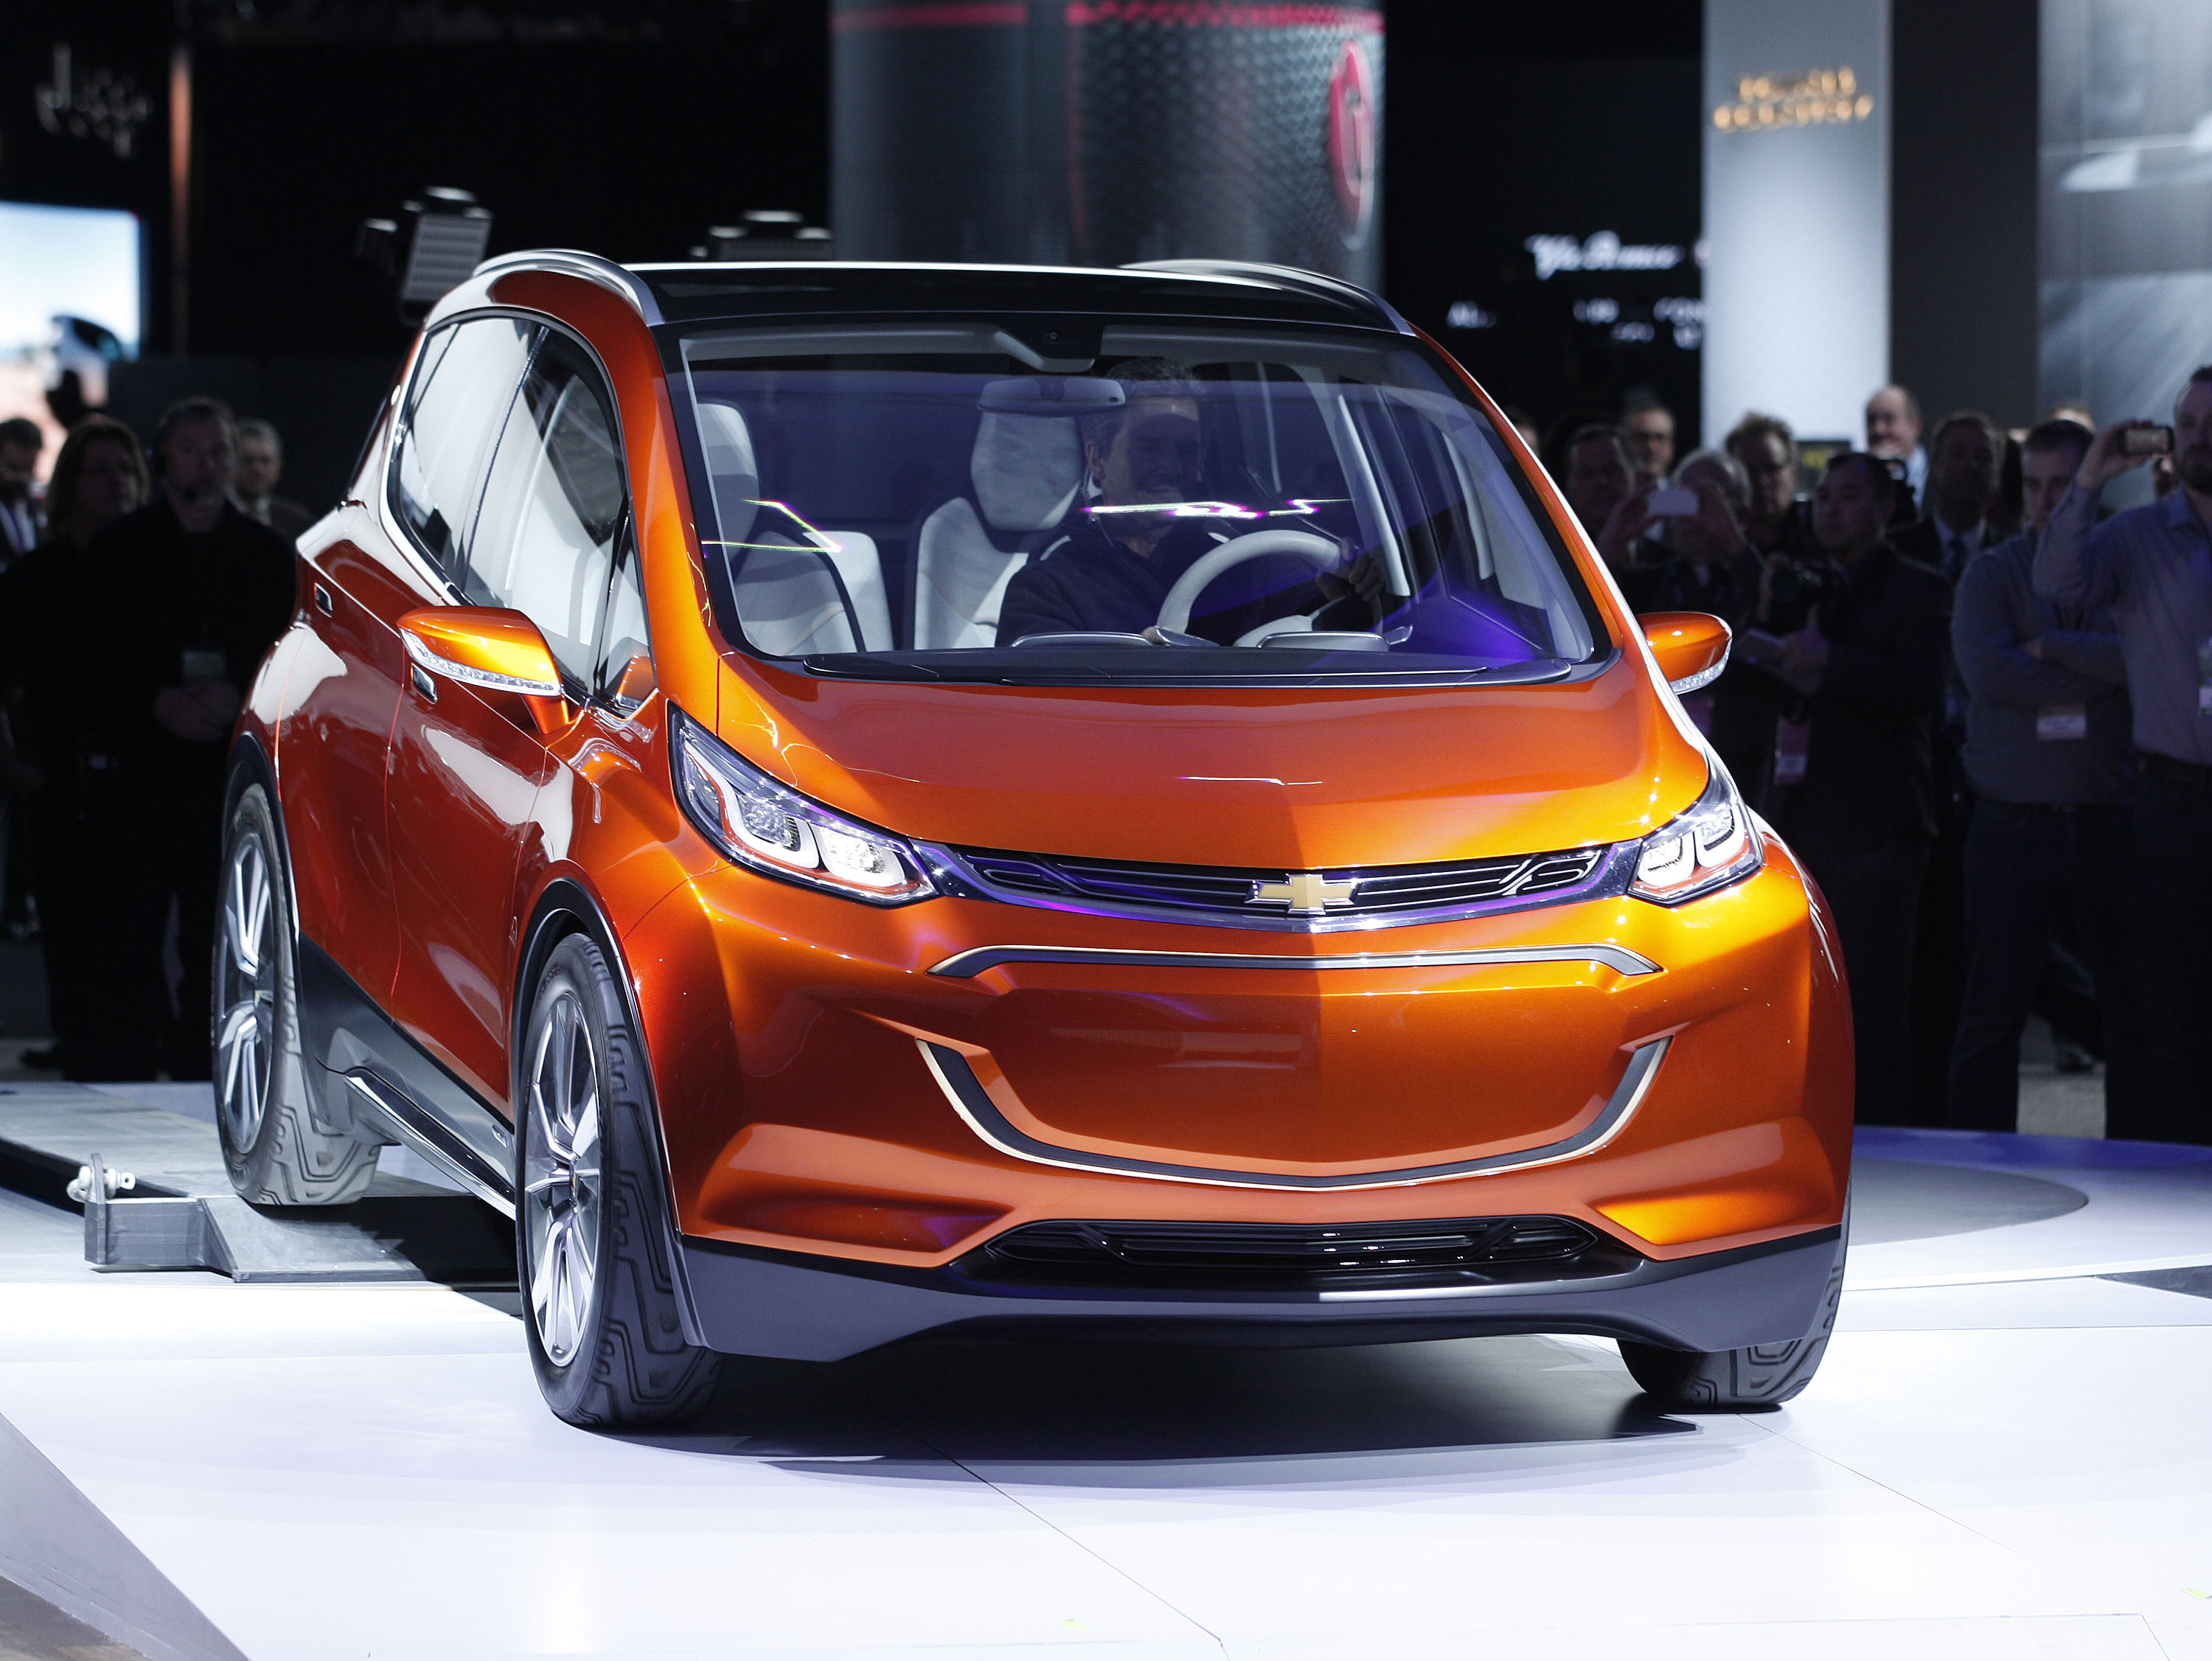 General Motors reveals the new Chevrolet Bolt concept to the media at the 2015 North American International Auto Show on January 12, 2015 in Detroit, Michigan. (Bill Pugliano&mdash;Getty Images)